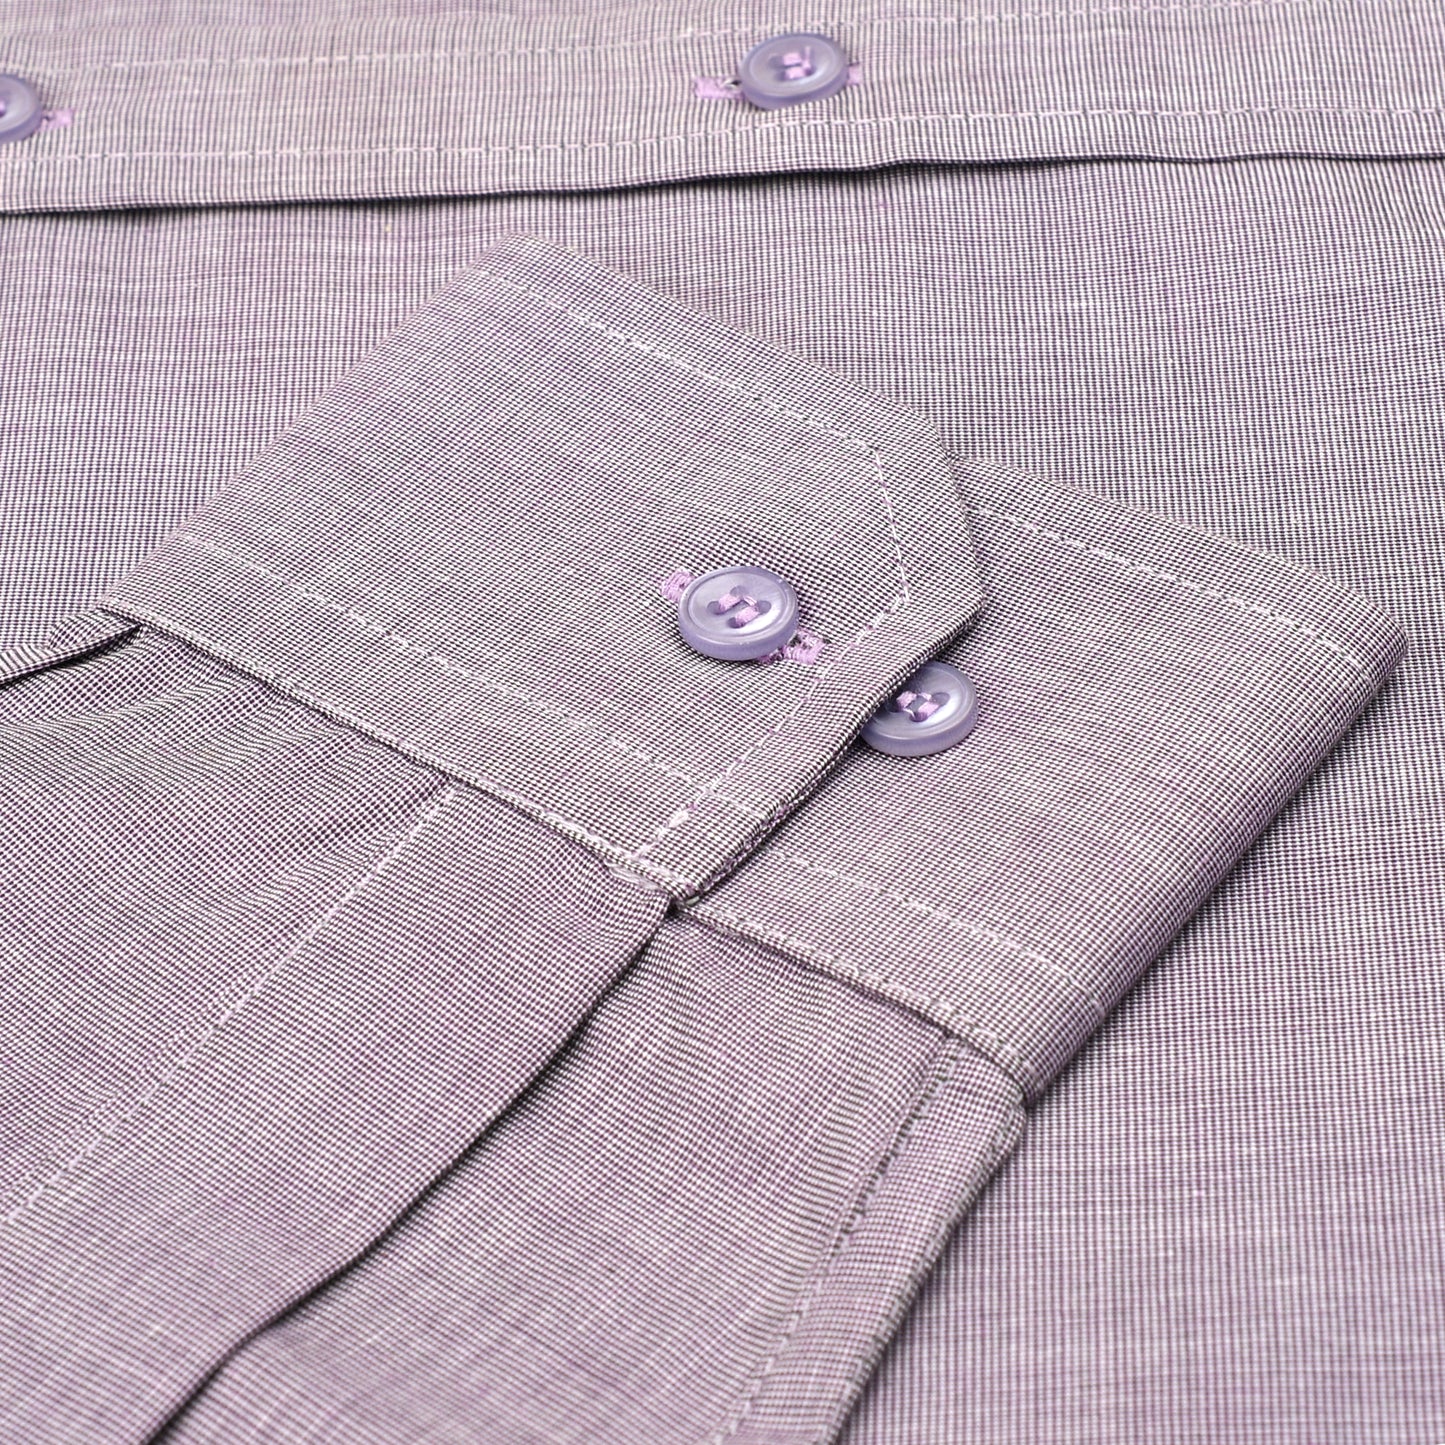 Distinguished Blend: White & Purple Checked Shirt